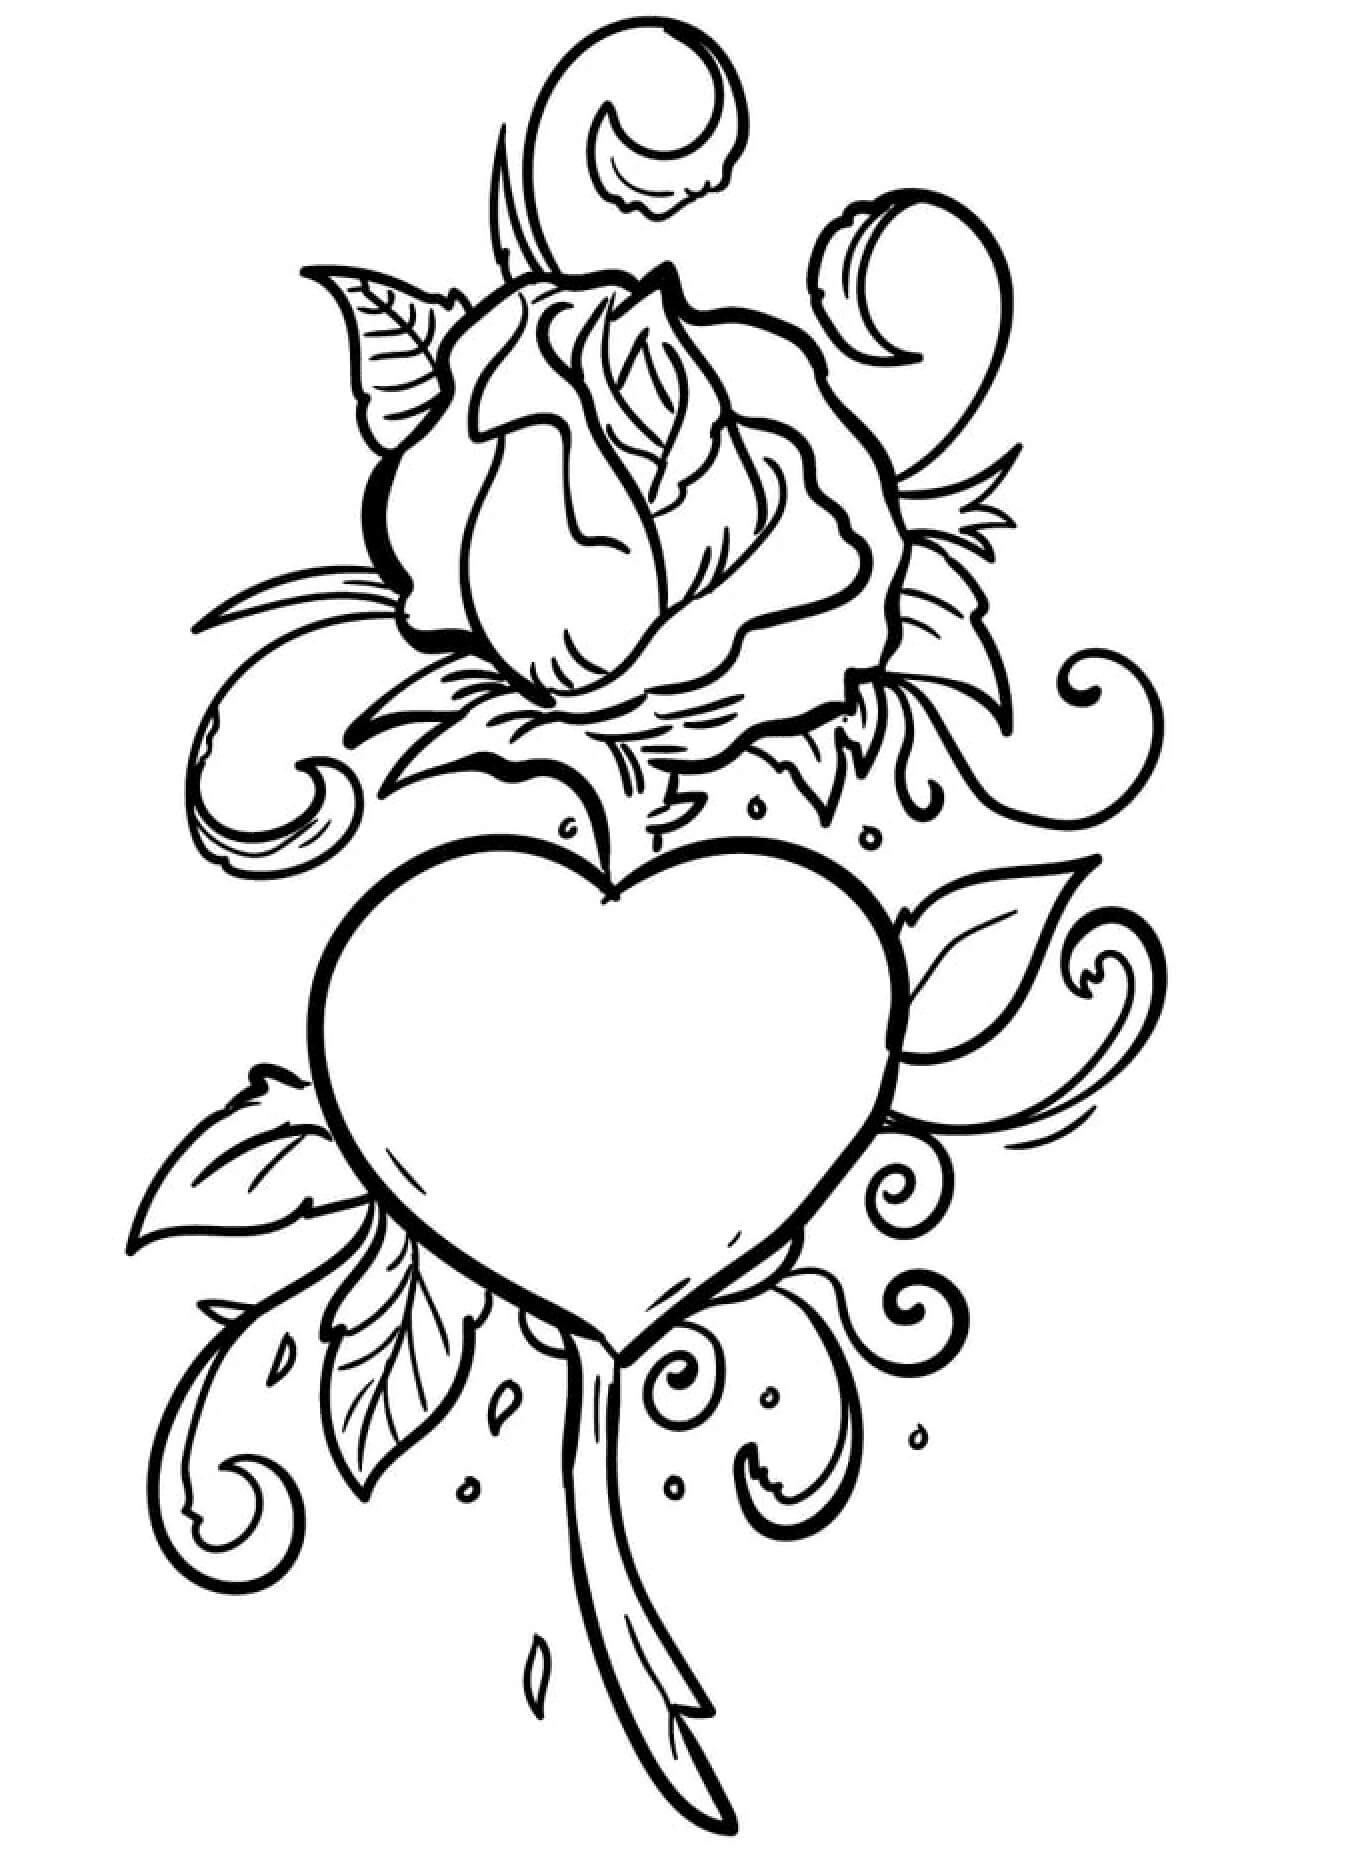 Rose tree with big heart coloring page